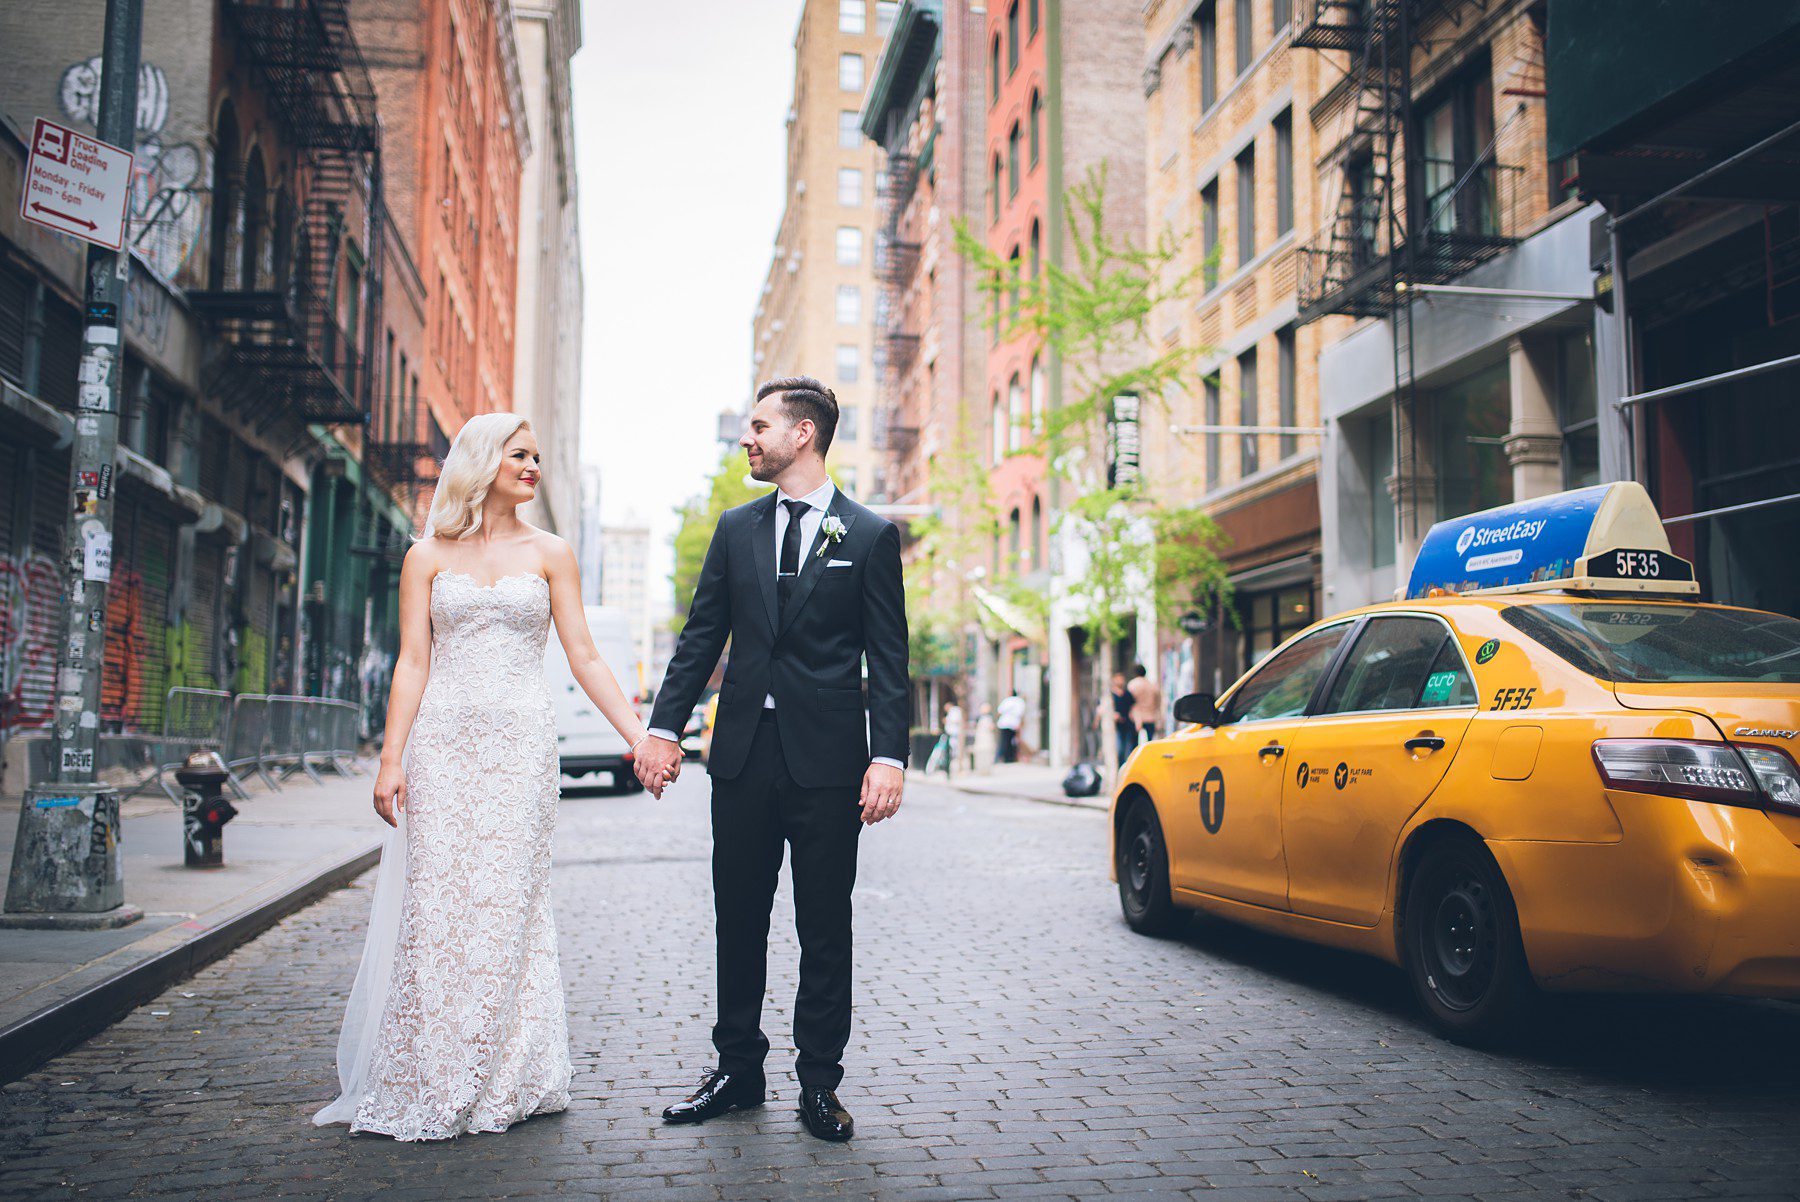 How To Get Married In New York Elope In Nyc Tips And Tricks,Cheapest Cities In Usa